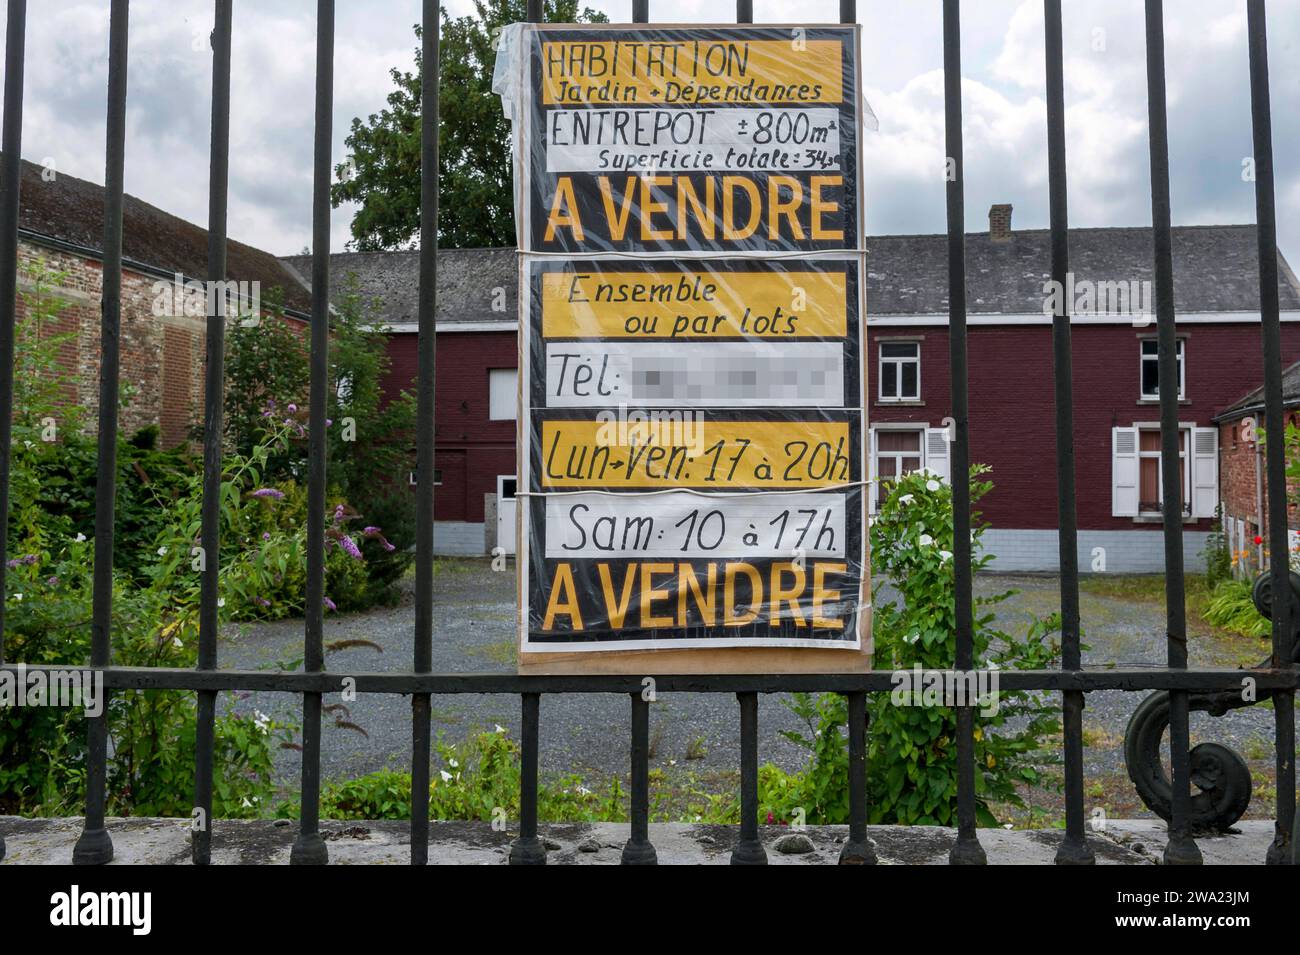 Maisons a vendre ou a louer | House for rent or to sale Stock Photo